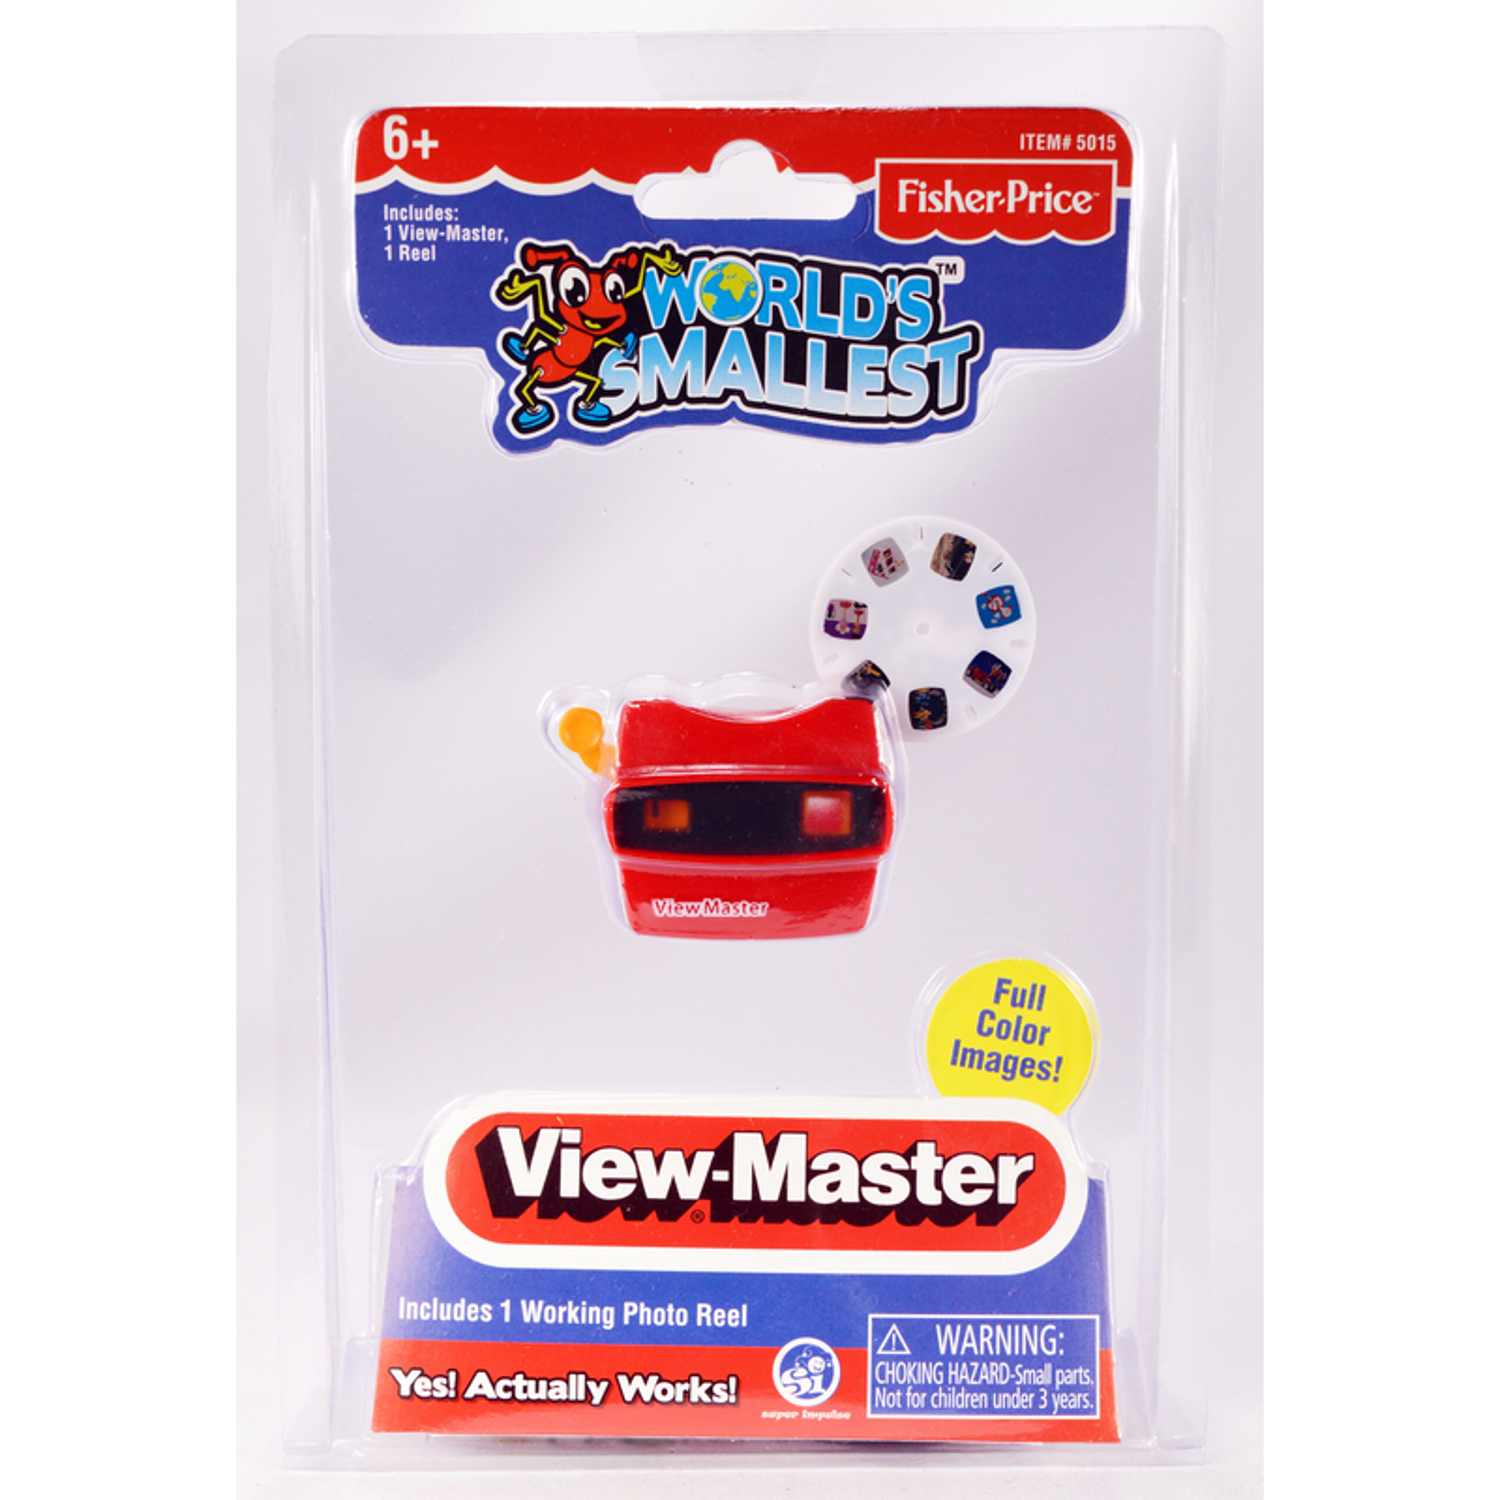 View-master Reel Viewmaster Reels Disc View Master Reel SVG Cutting File 